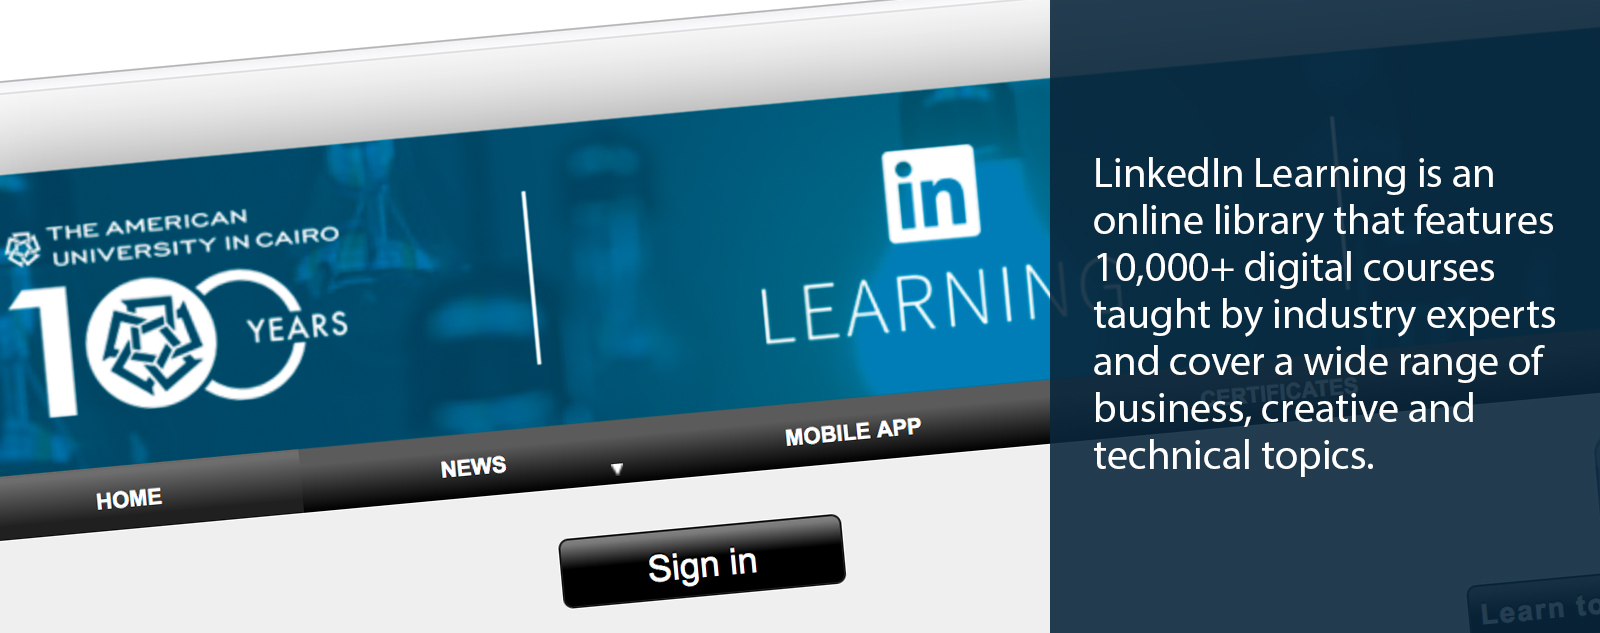 linkedin learning project management